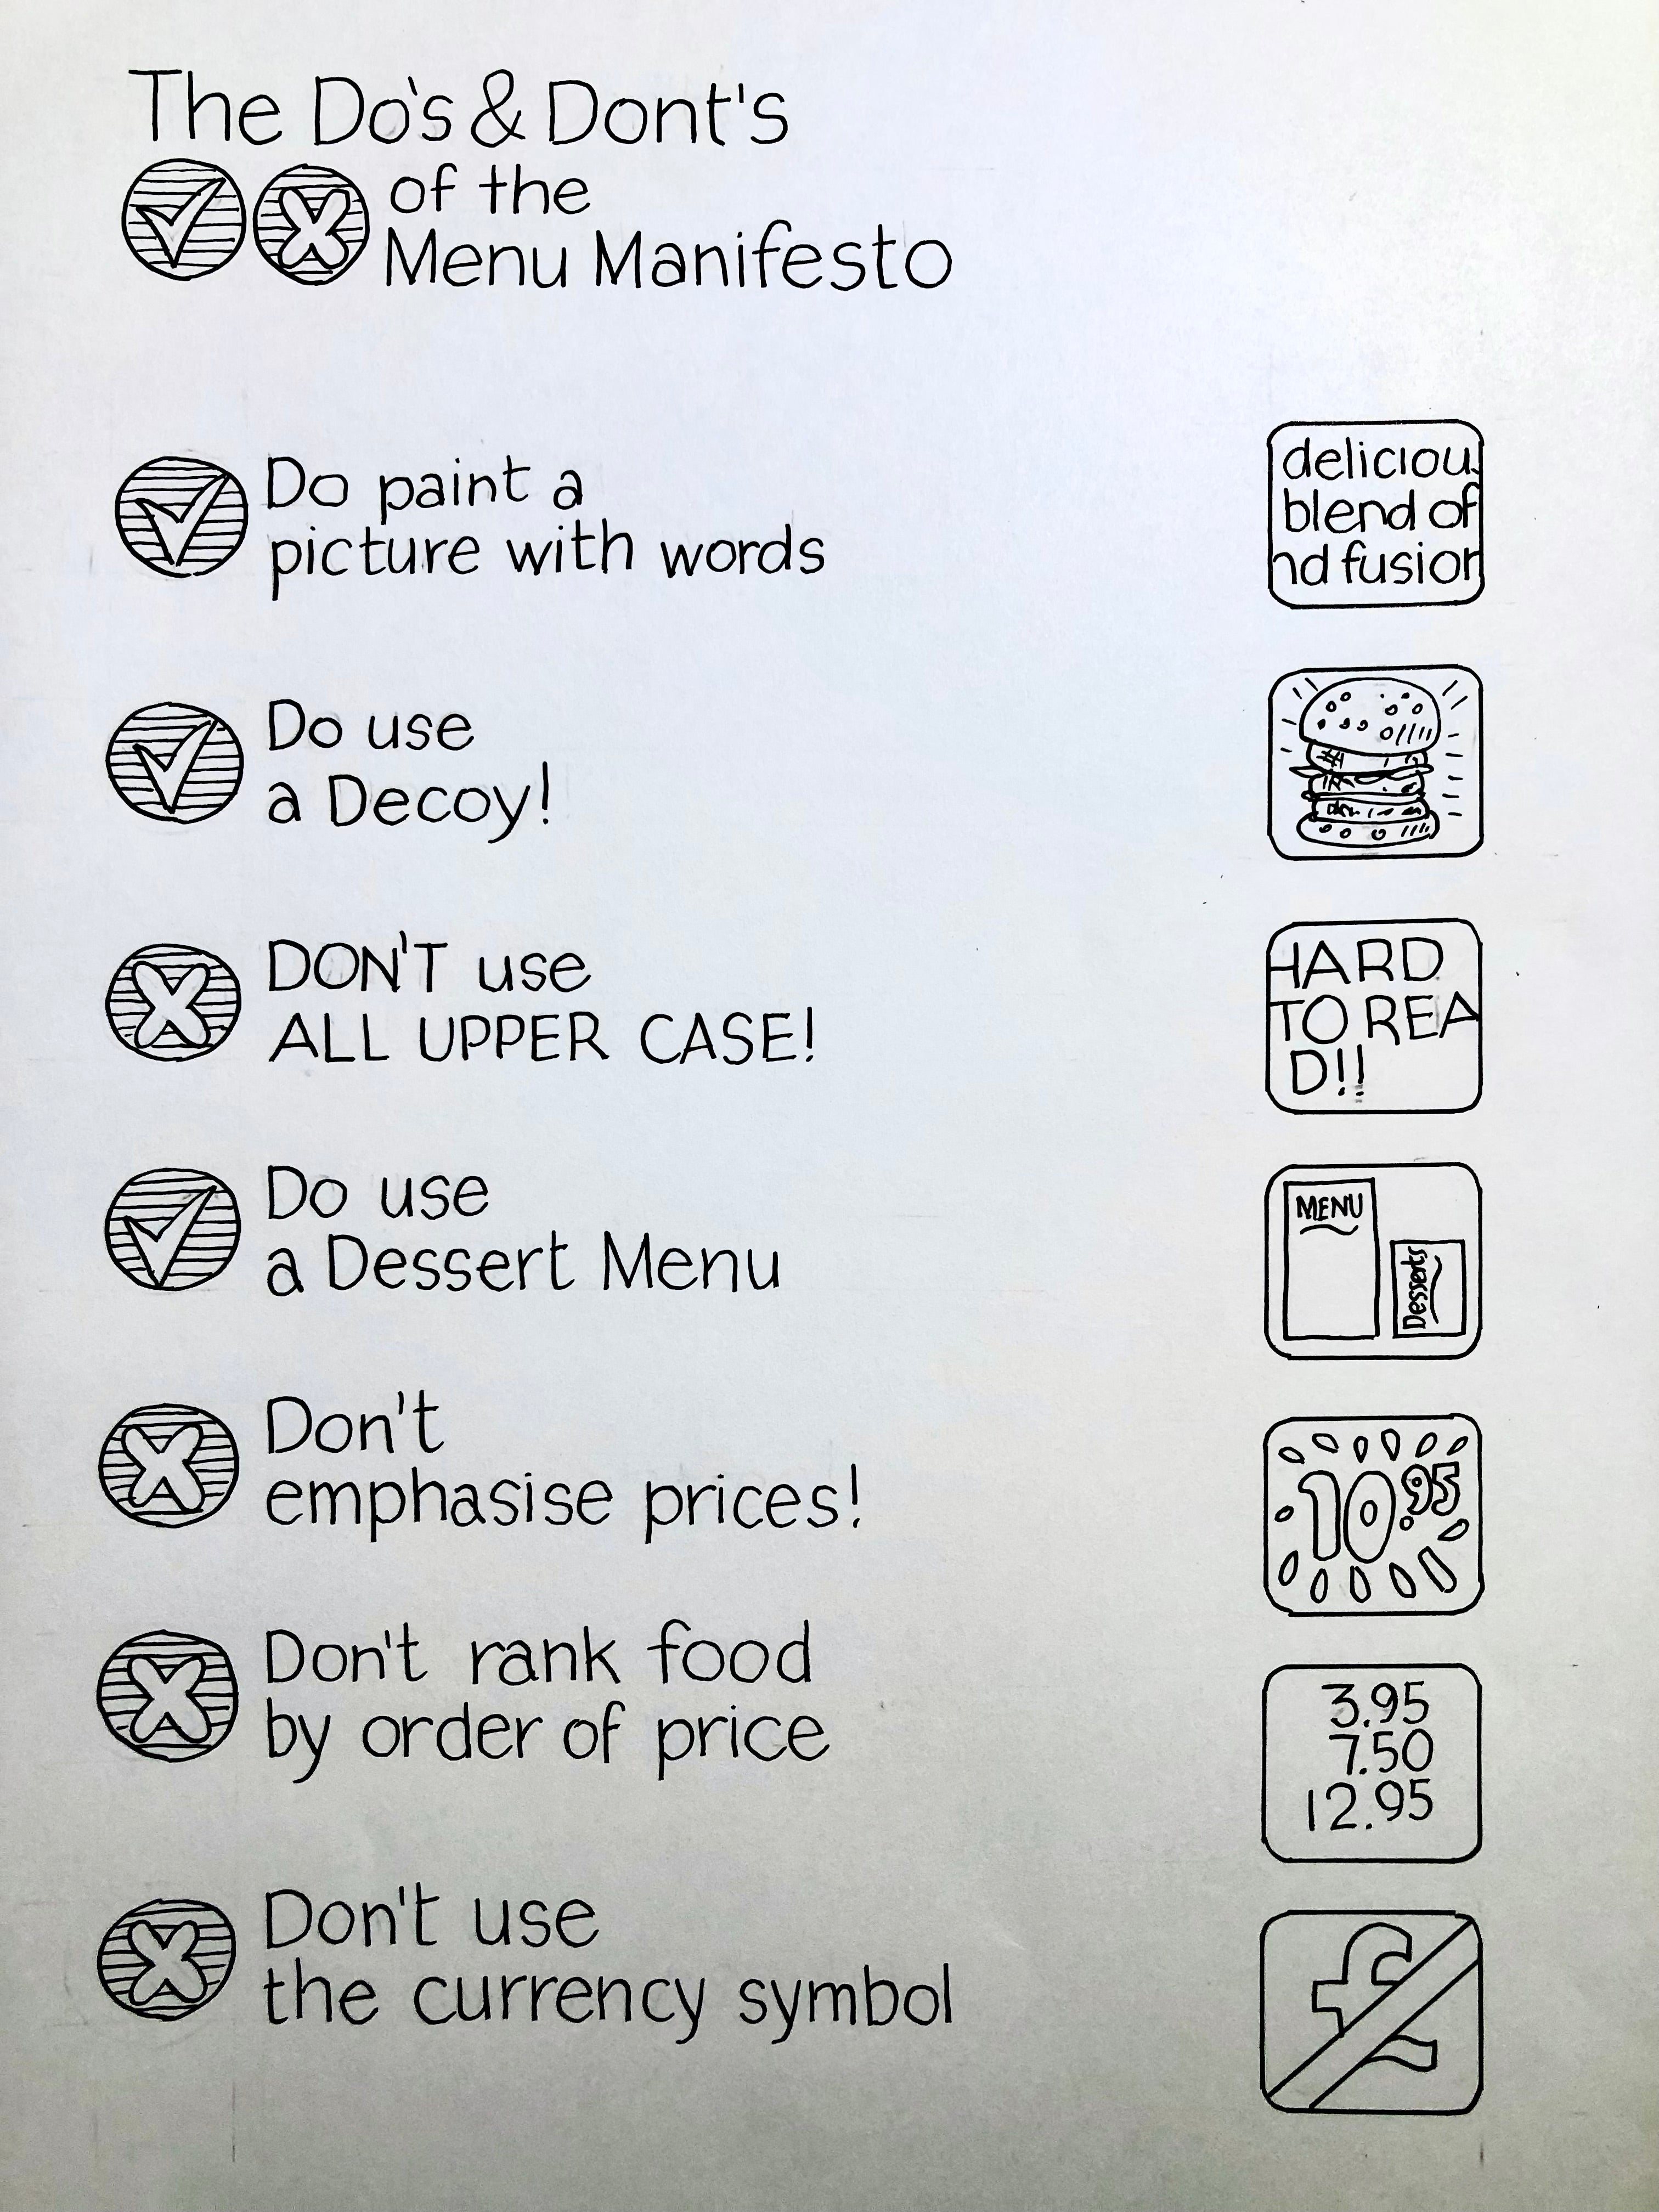 Sketch of a selection of menu dos and don'ts